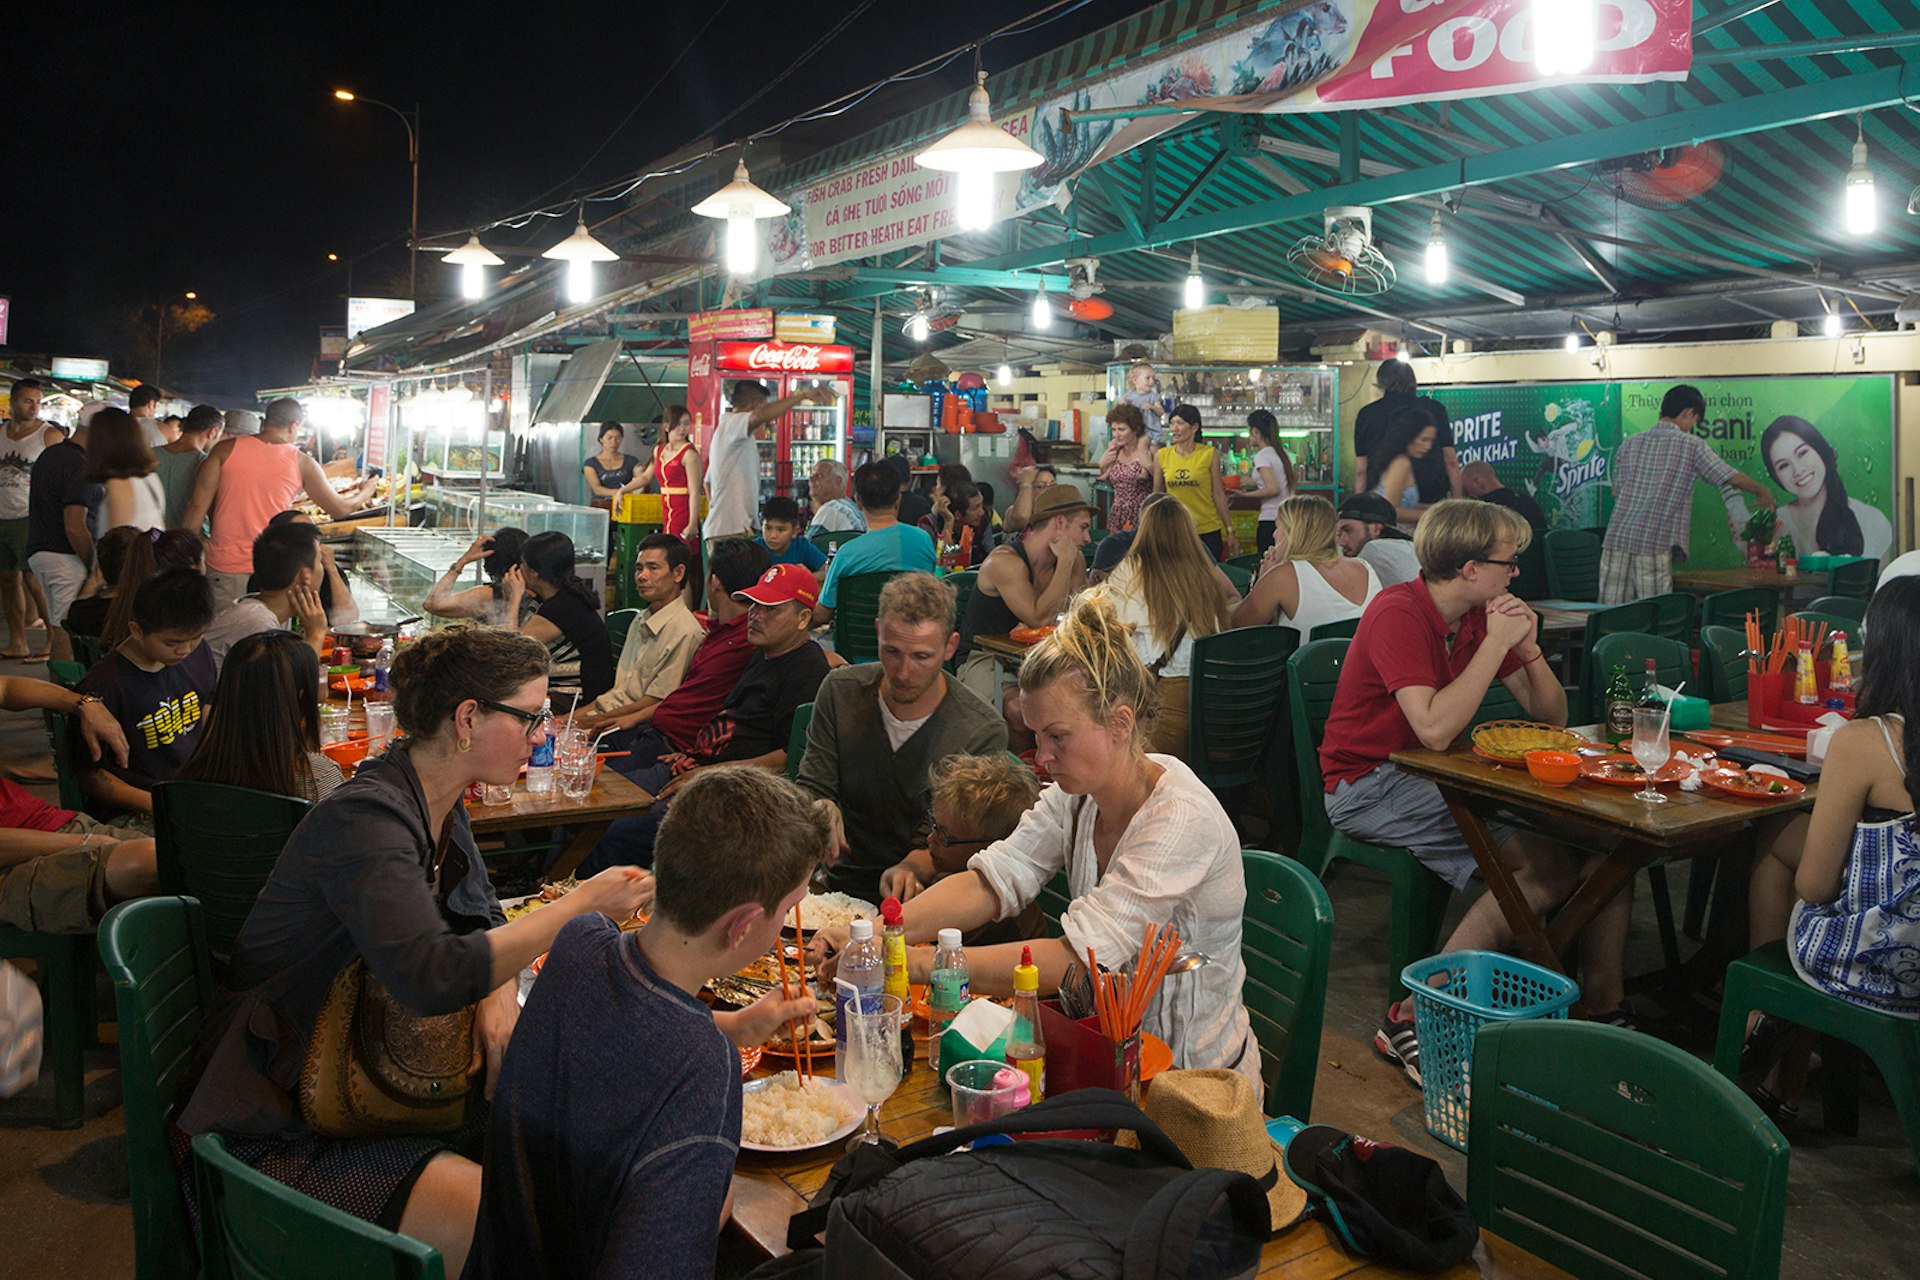 Many Tourists eating at Duong Dong night market in Phu Quoc island, Vietnam © AsianDream / Getty Images